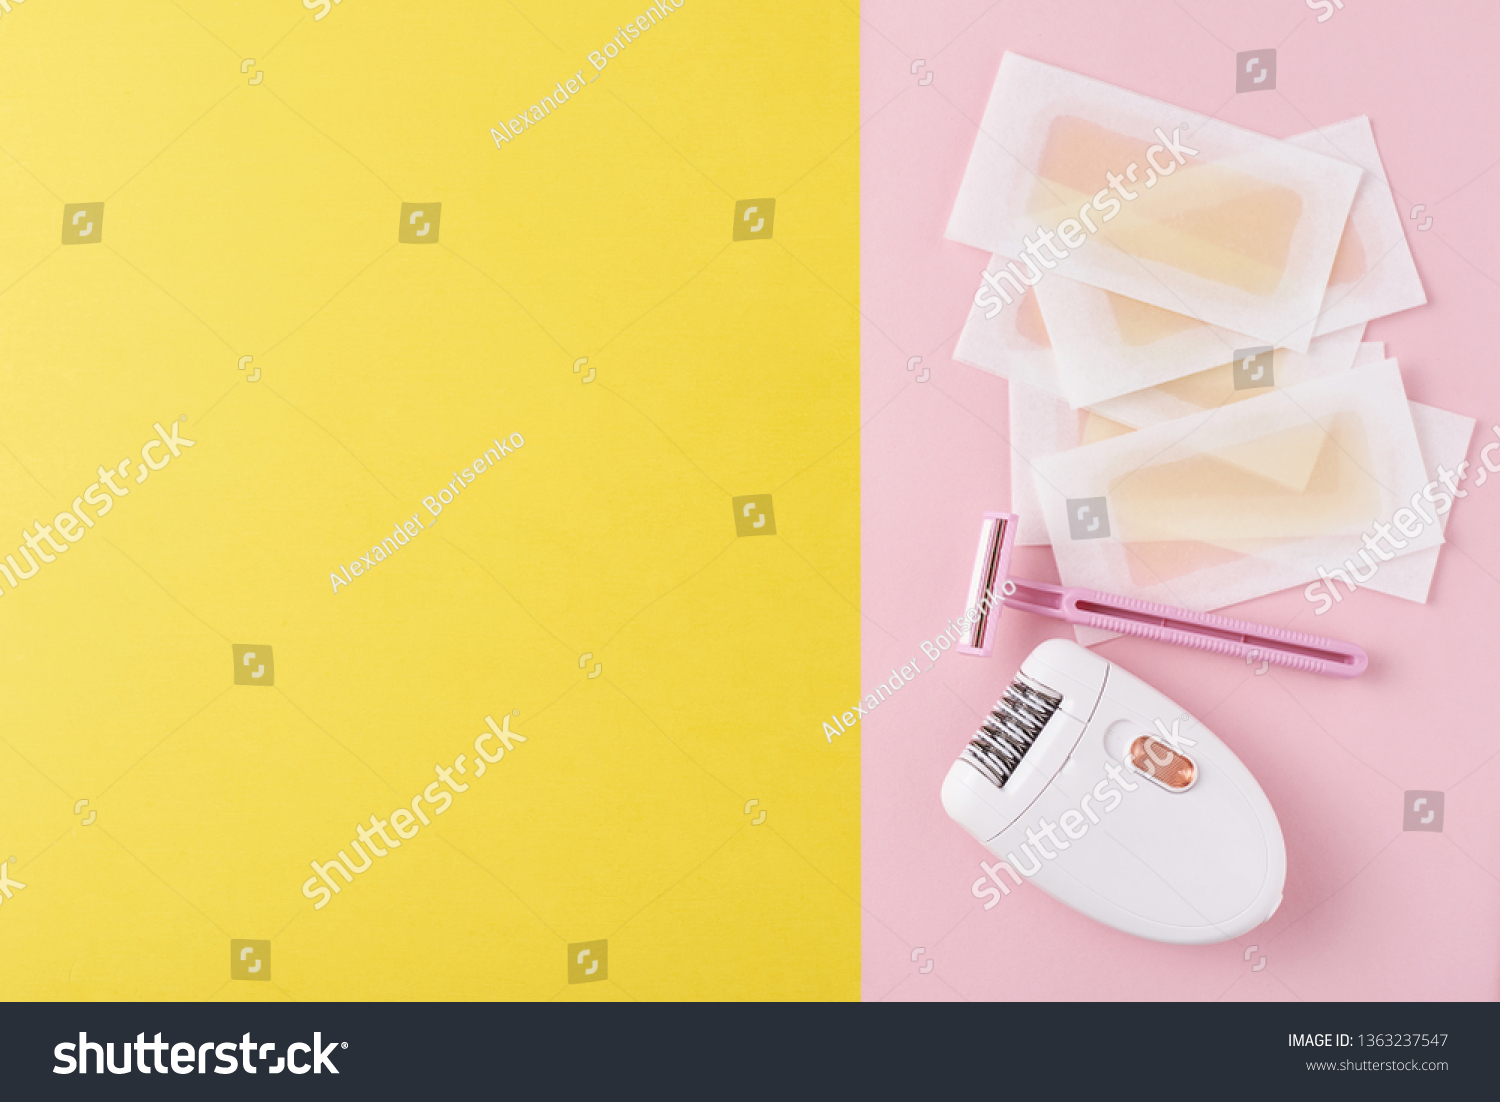 Epilator, razor for shaving and wax strips on yellow and pink background with copy space. Set for depilation, bodycare concept #1363237547